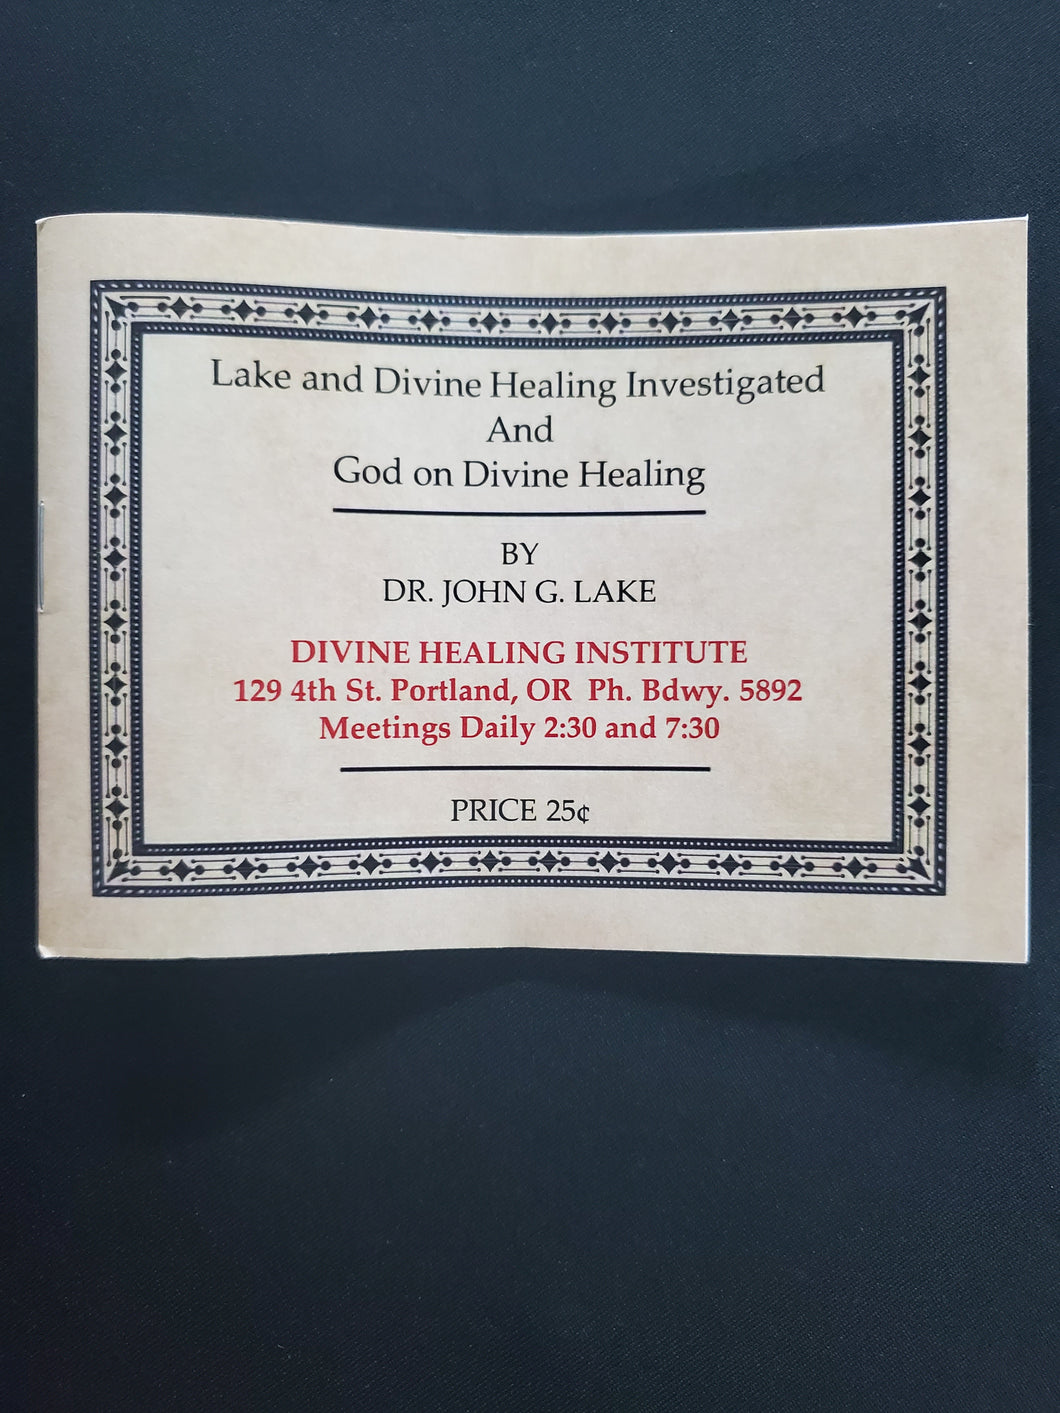 Lake and Divine Healing Investigated And God on Divine Healing